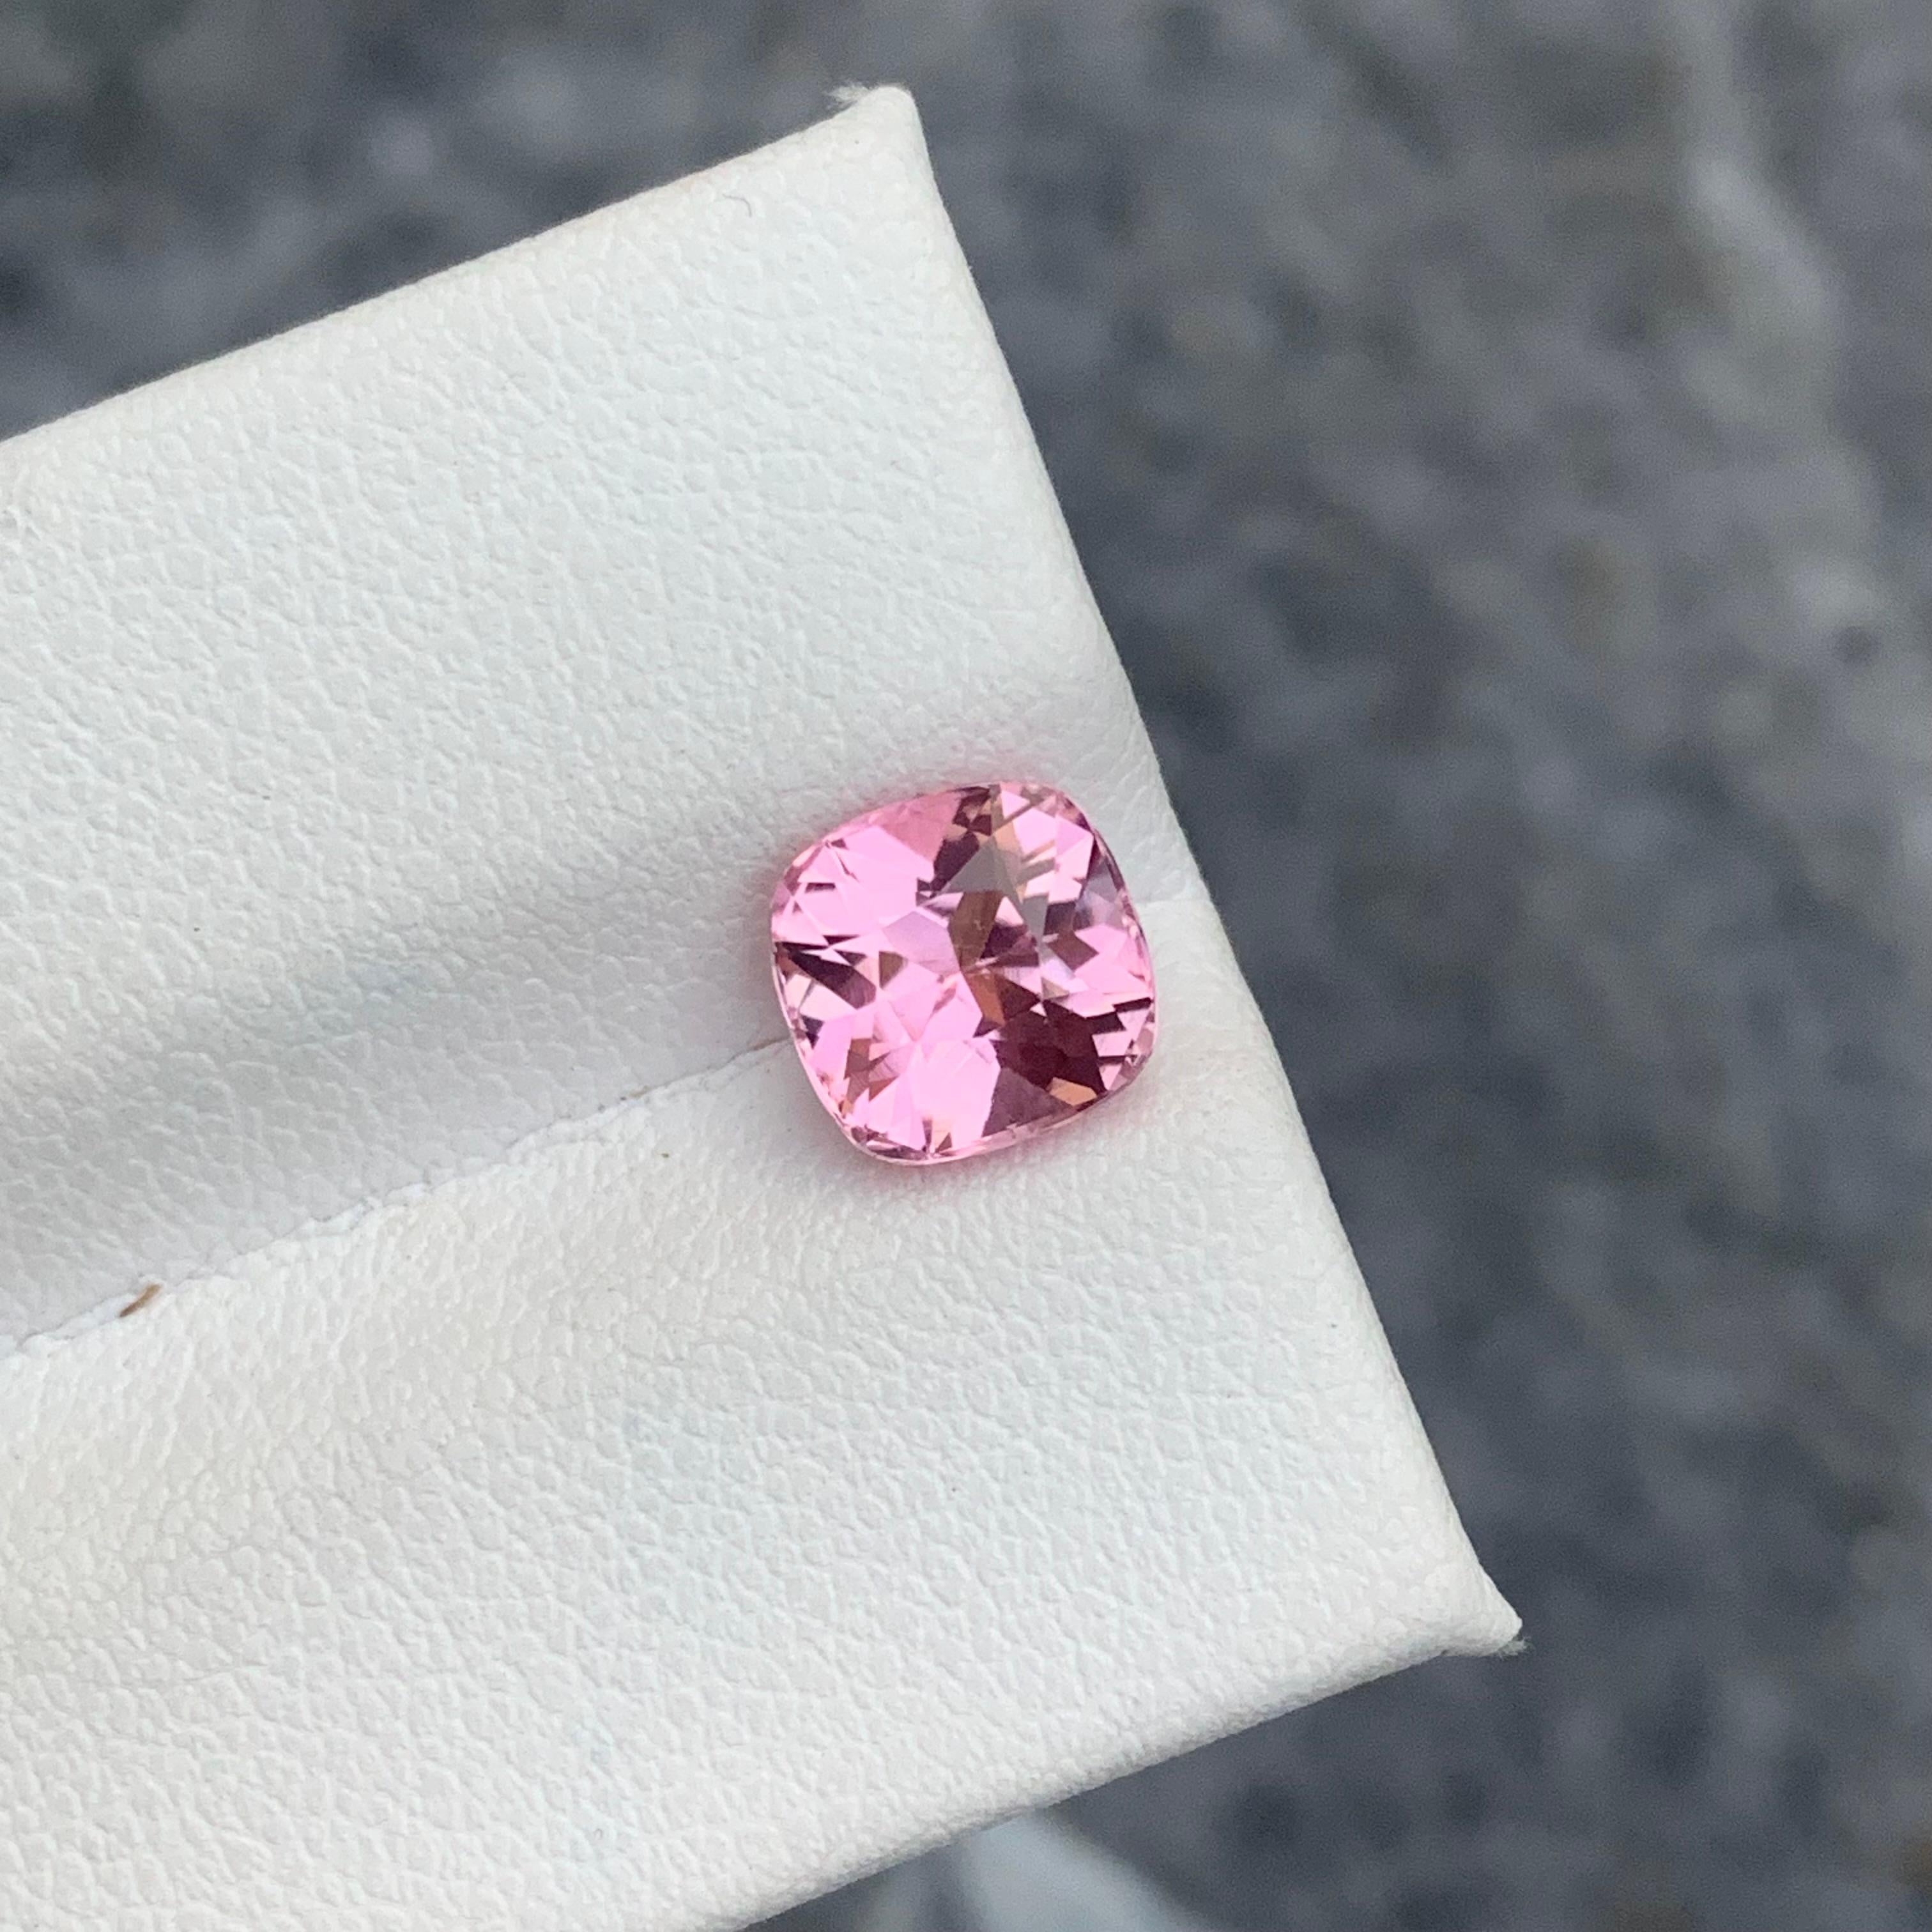 Women's or Men's Exceptional 2.0 Carat Natural Loose Baby Pink Tourmaline from Afghan Mine